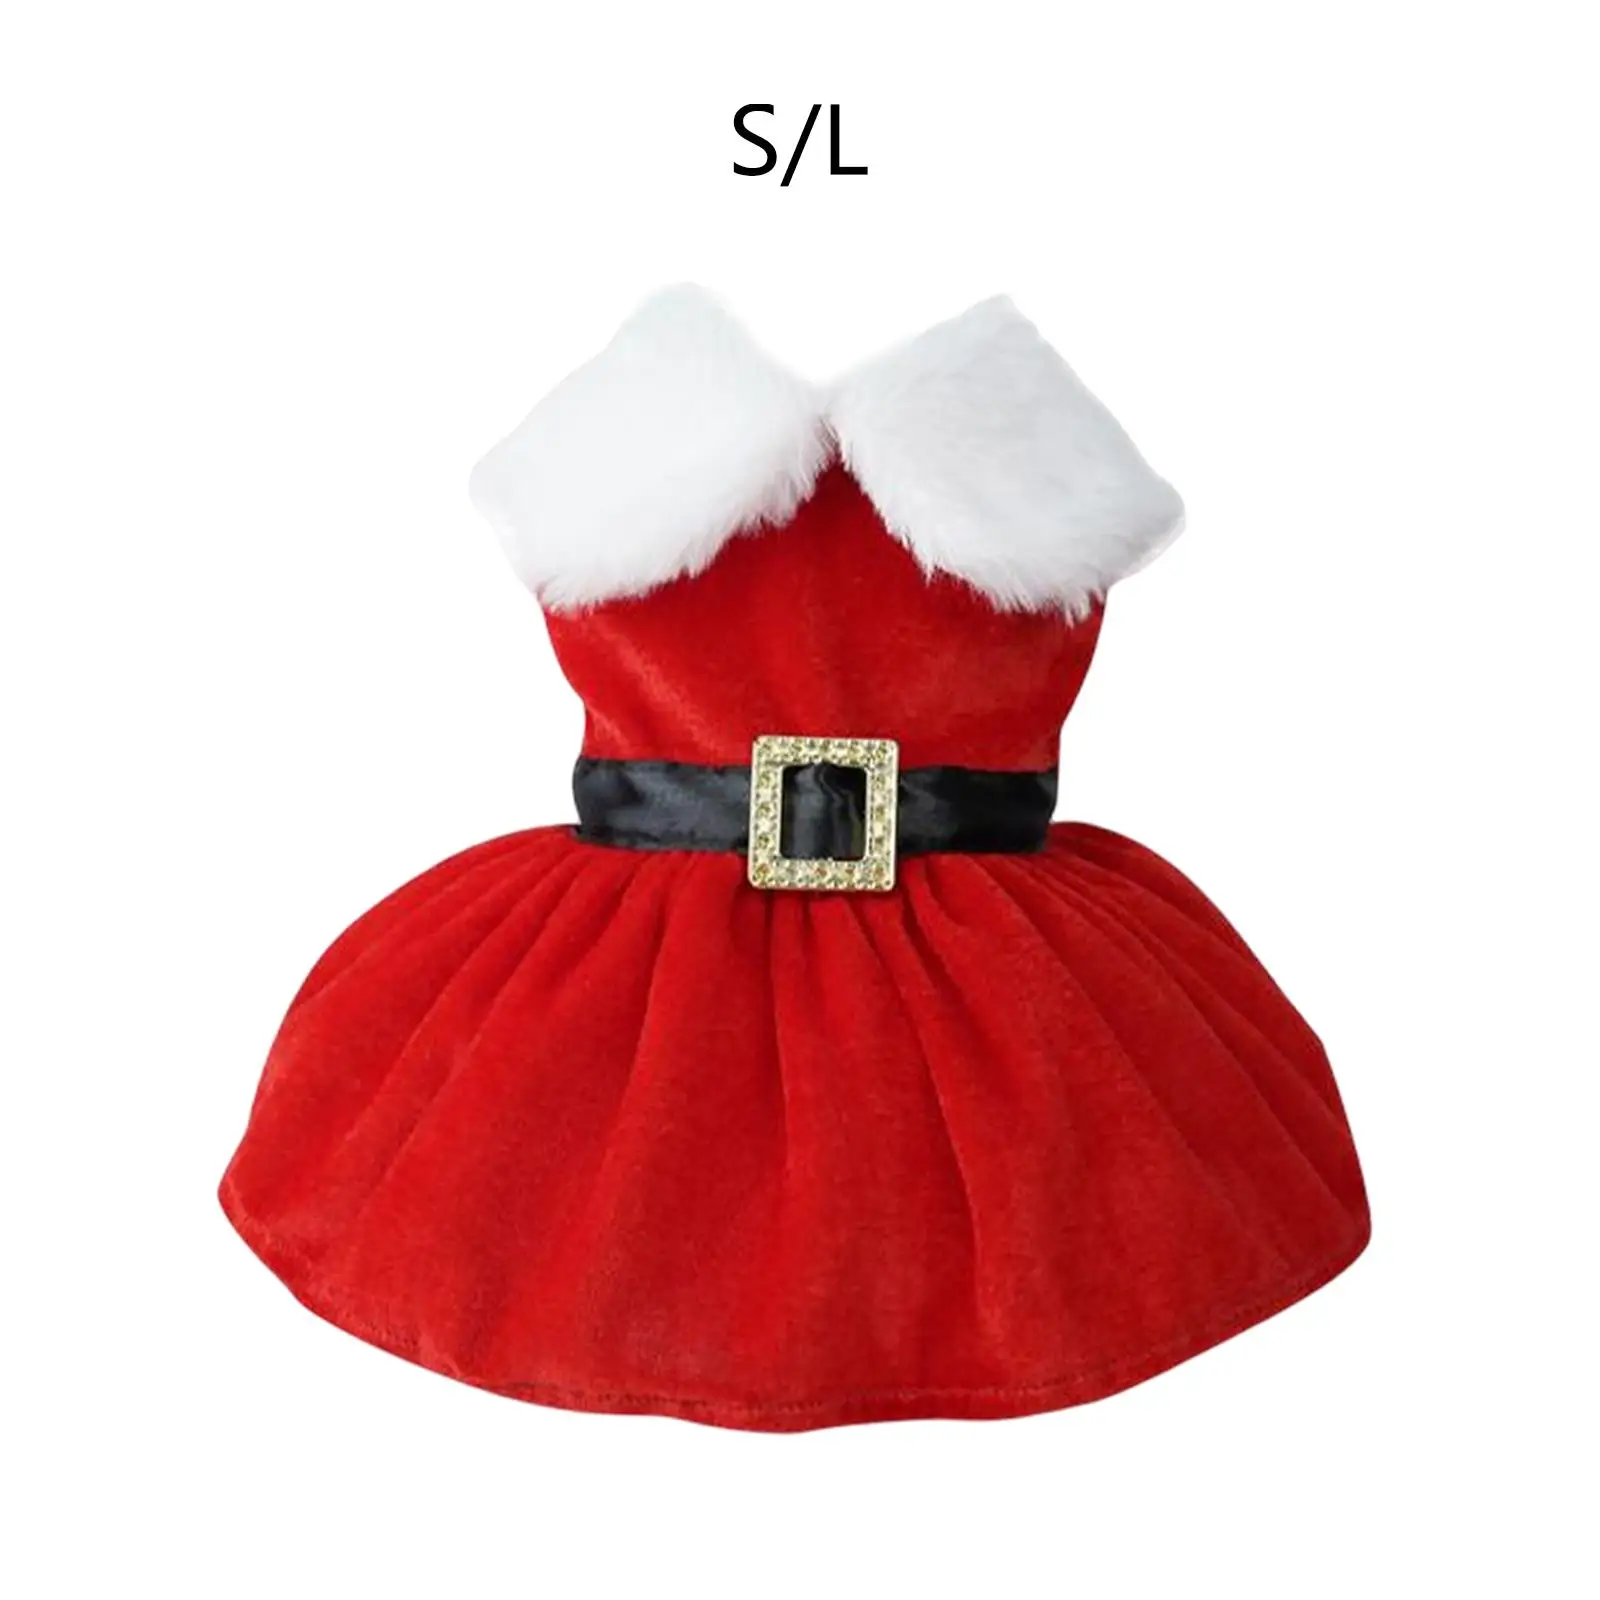 Pet Christmas Costume Clothes Dress up Soft Clothing dog Cosplay Holiday Accessories Warm Winter festival Outfit